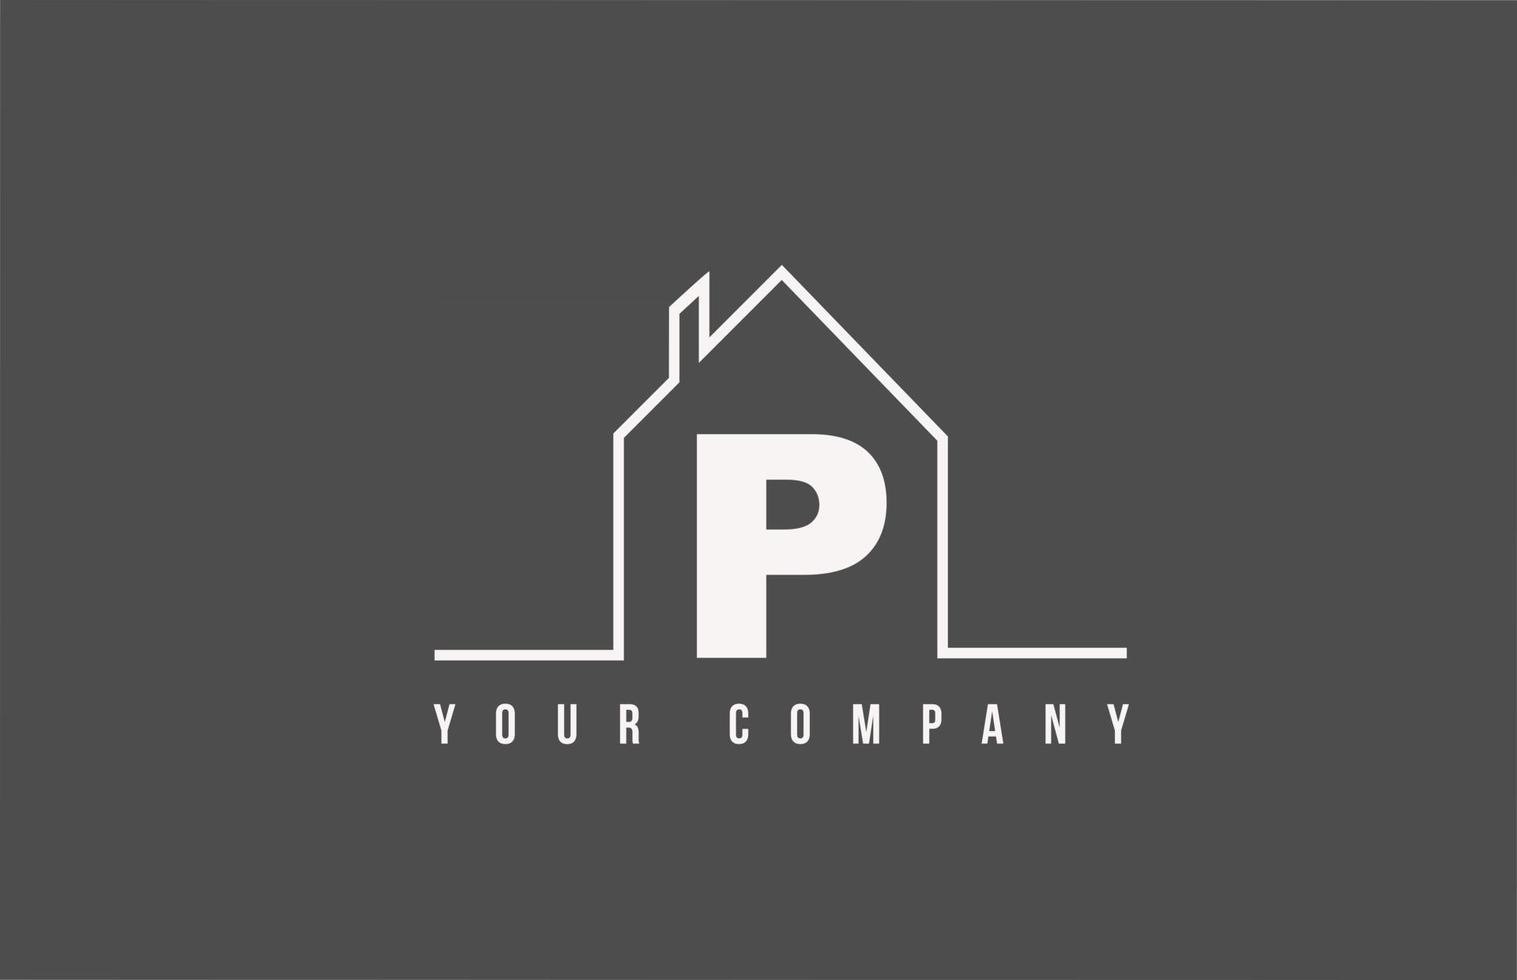 P alphabet letter icon logo of a home. Real estate house design for company and business identity with line vector